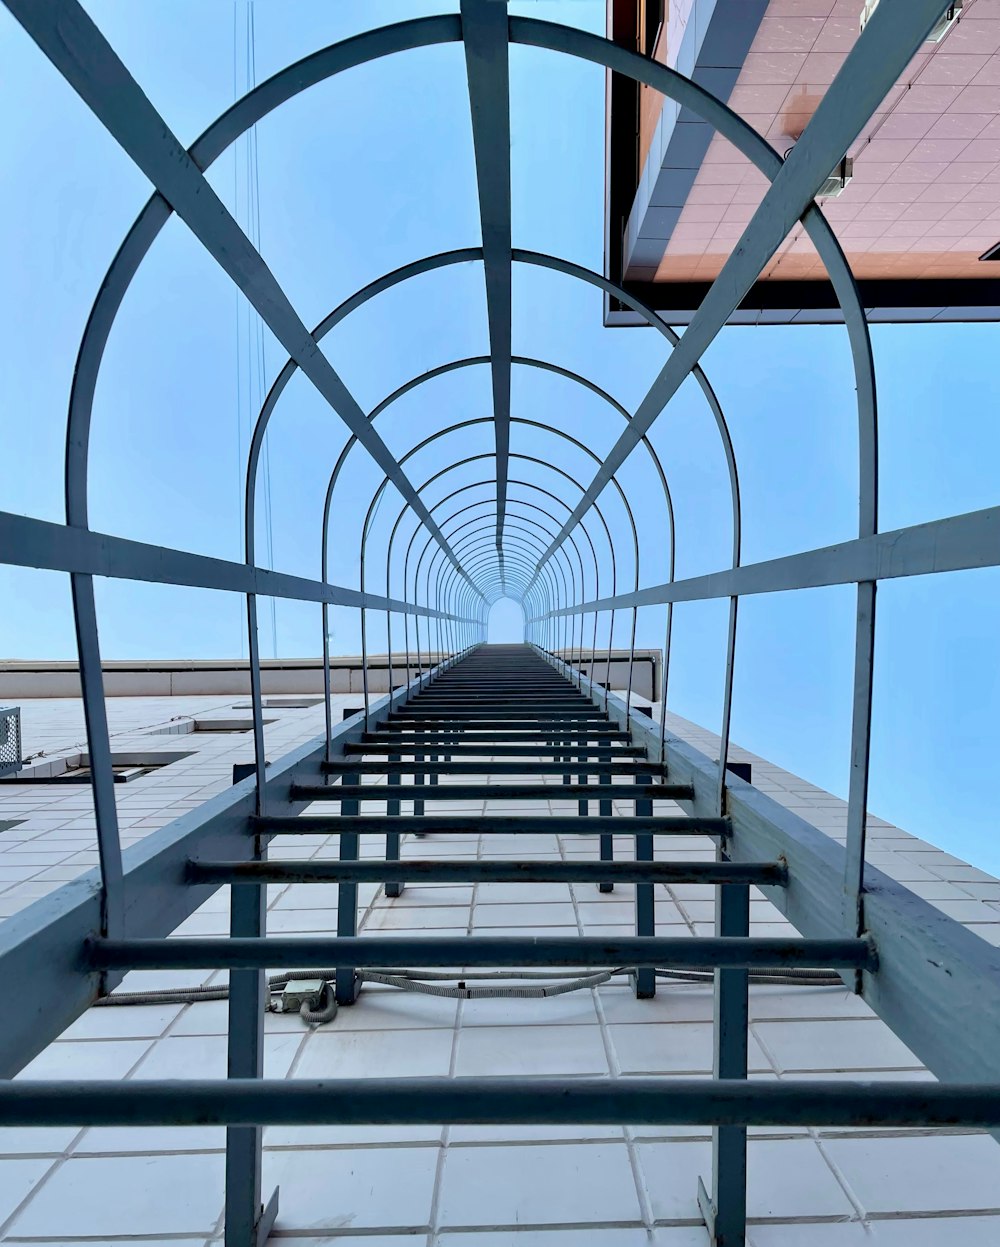 a view of a walkway through a glass tunnel